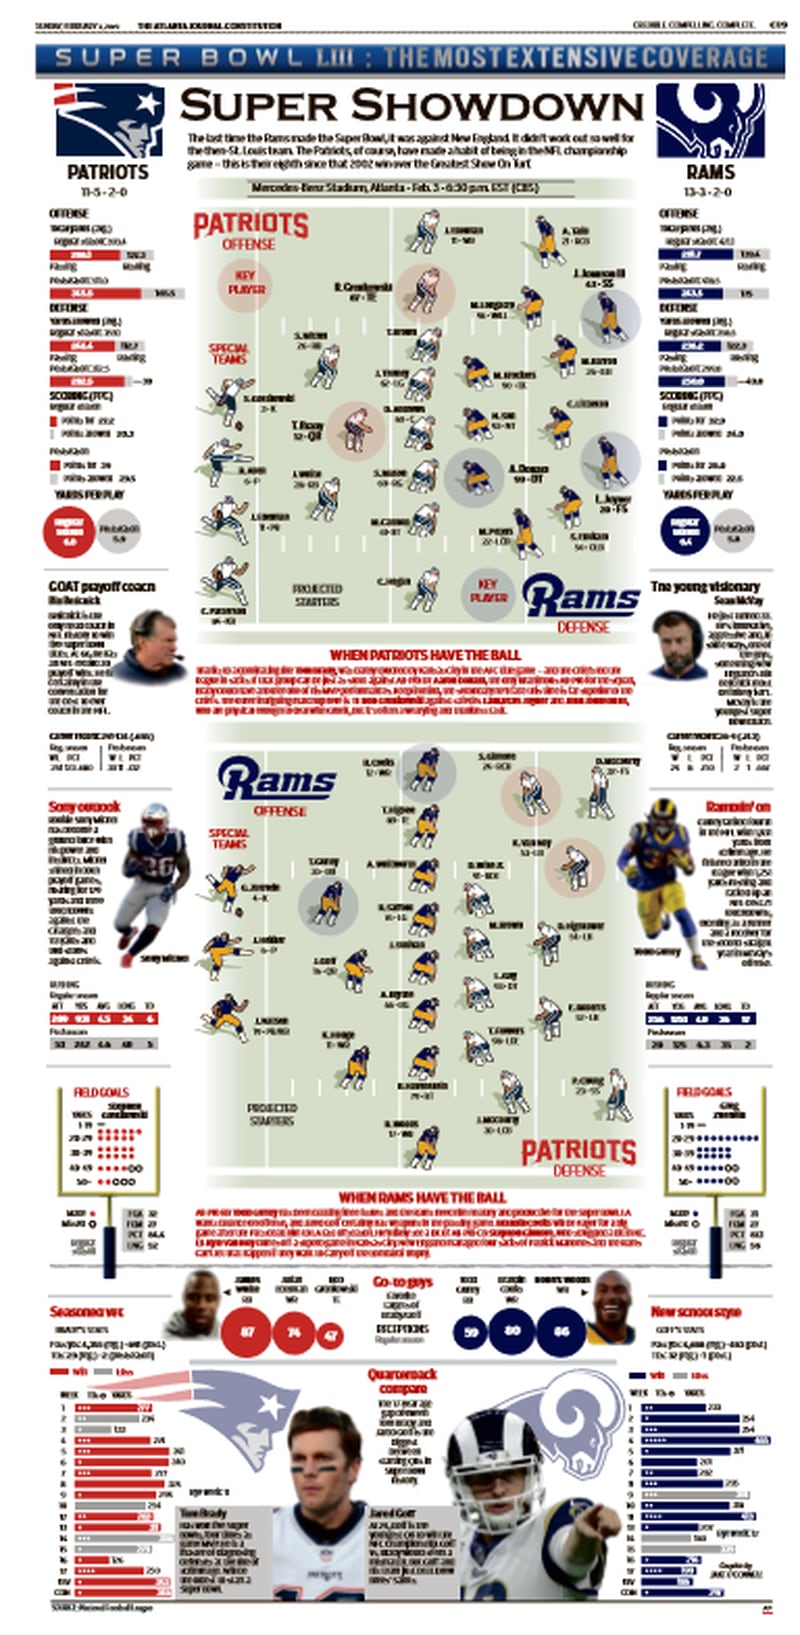 The AJC's 24-page section is filled with stories and stats to help you follow the Super Bowl on Sunday, including this full page guide to both teams, key players, coaches and stats to watch. (AJCePaper)